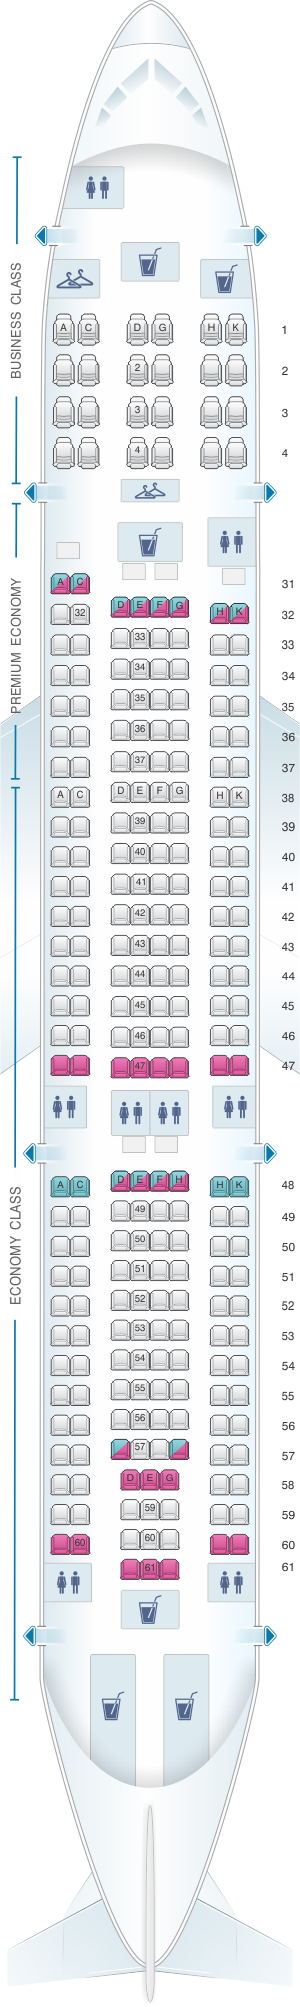 Seat map for China Southern Airlines Airbus A330-200 Layout A